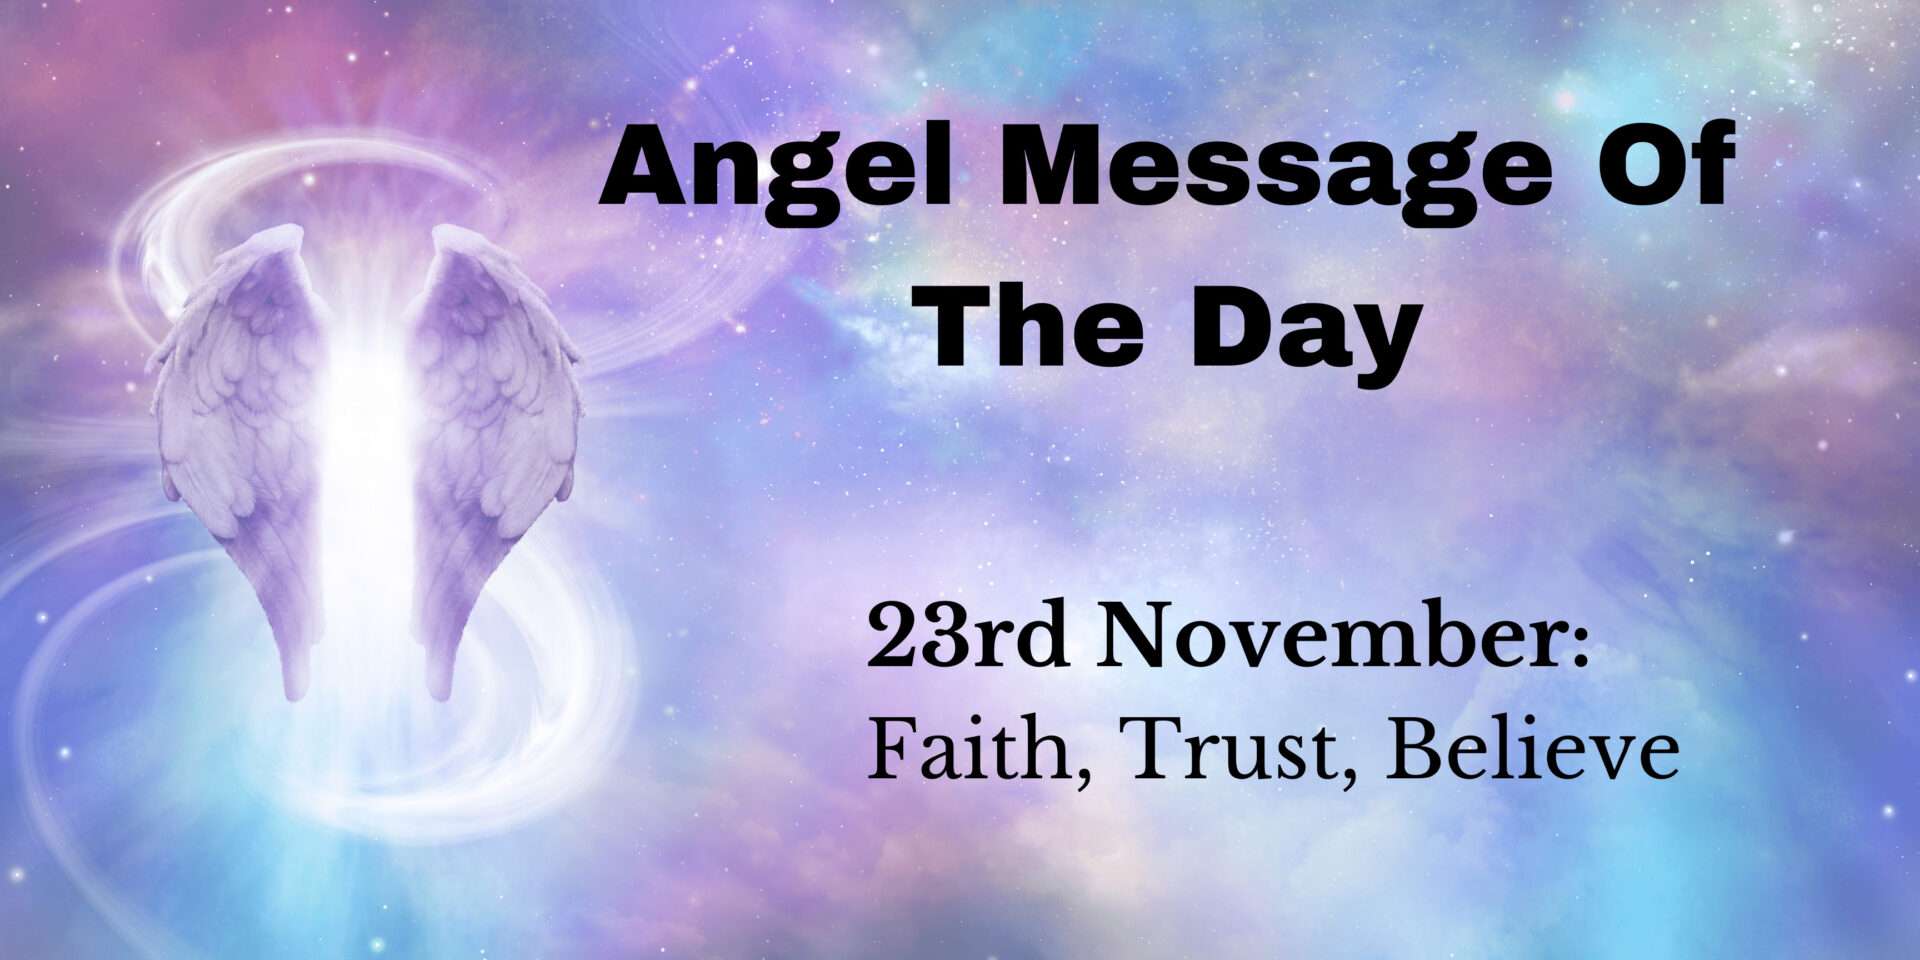 angel message of the day : faith, trust, believe